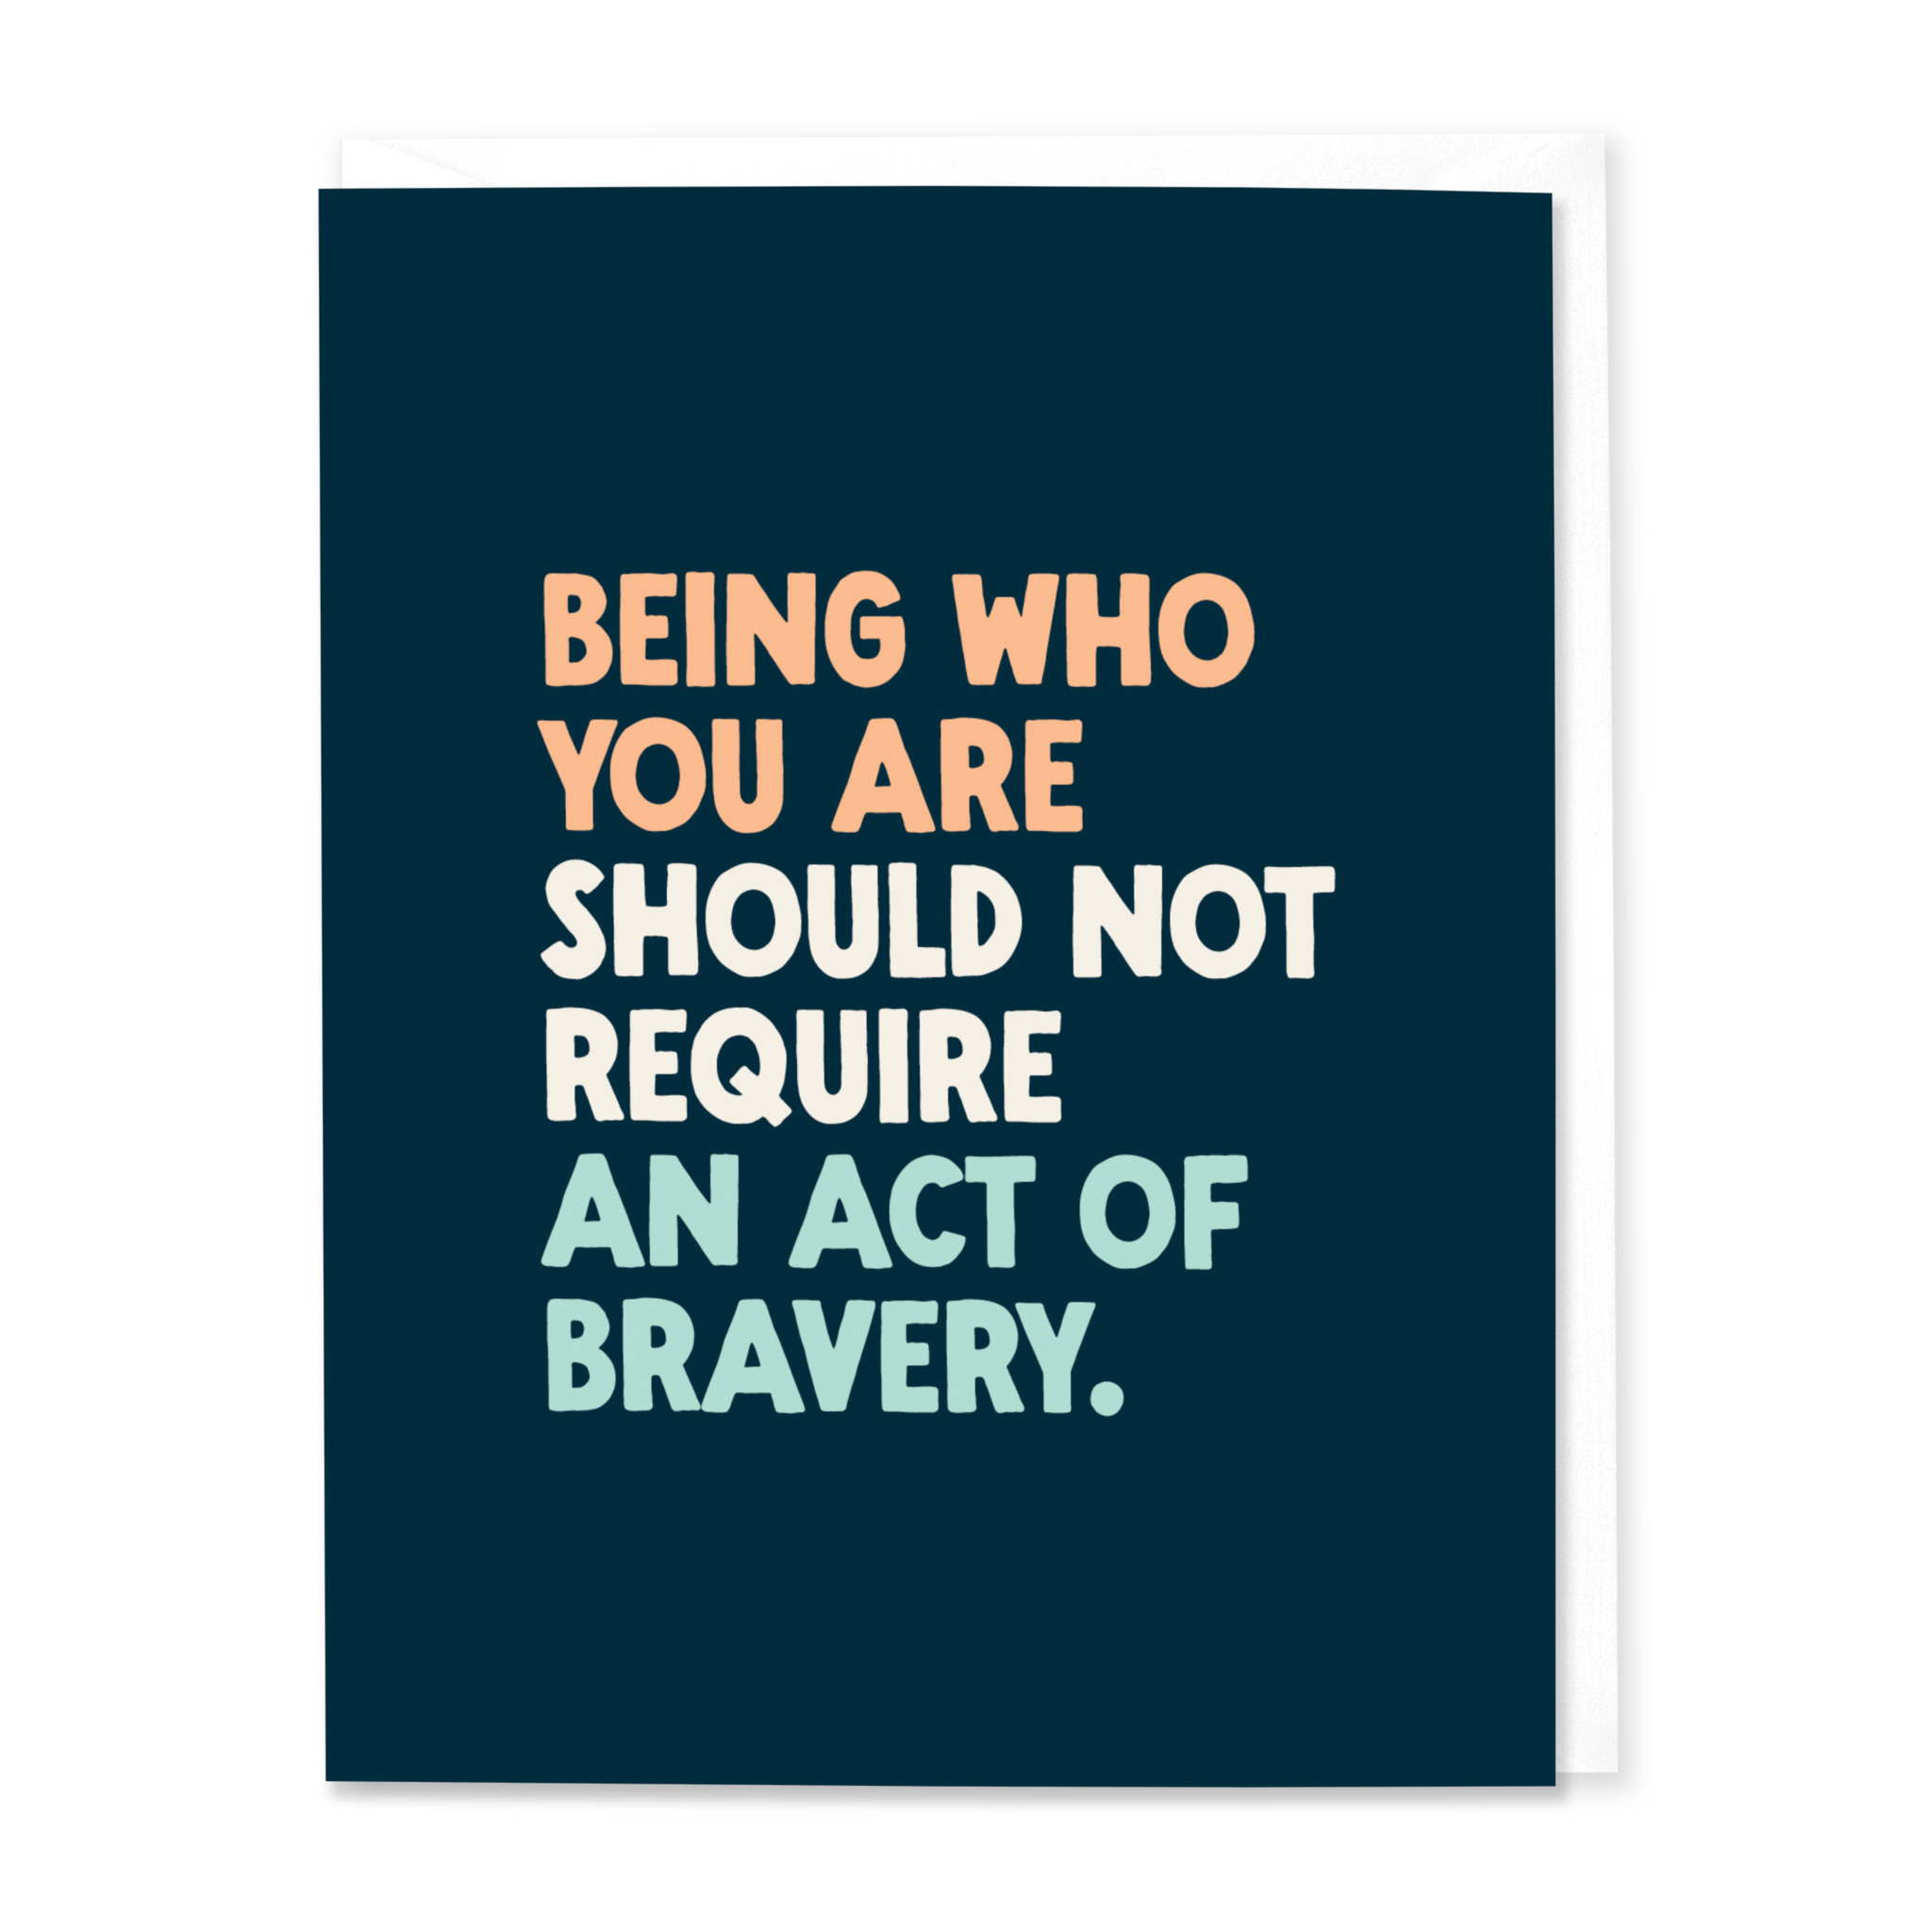 An Act of Bravery (Set of 8)